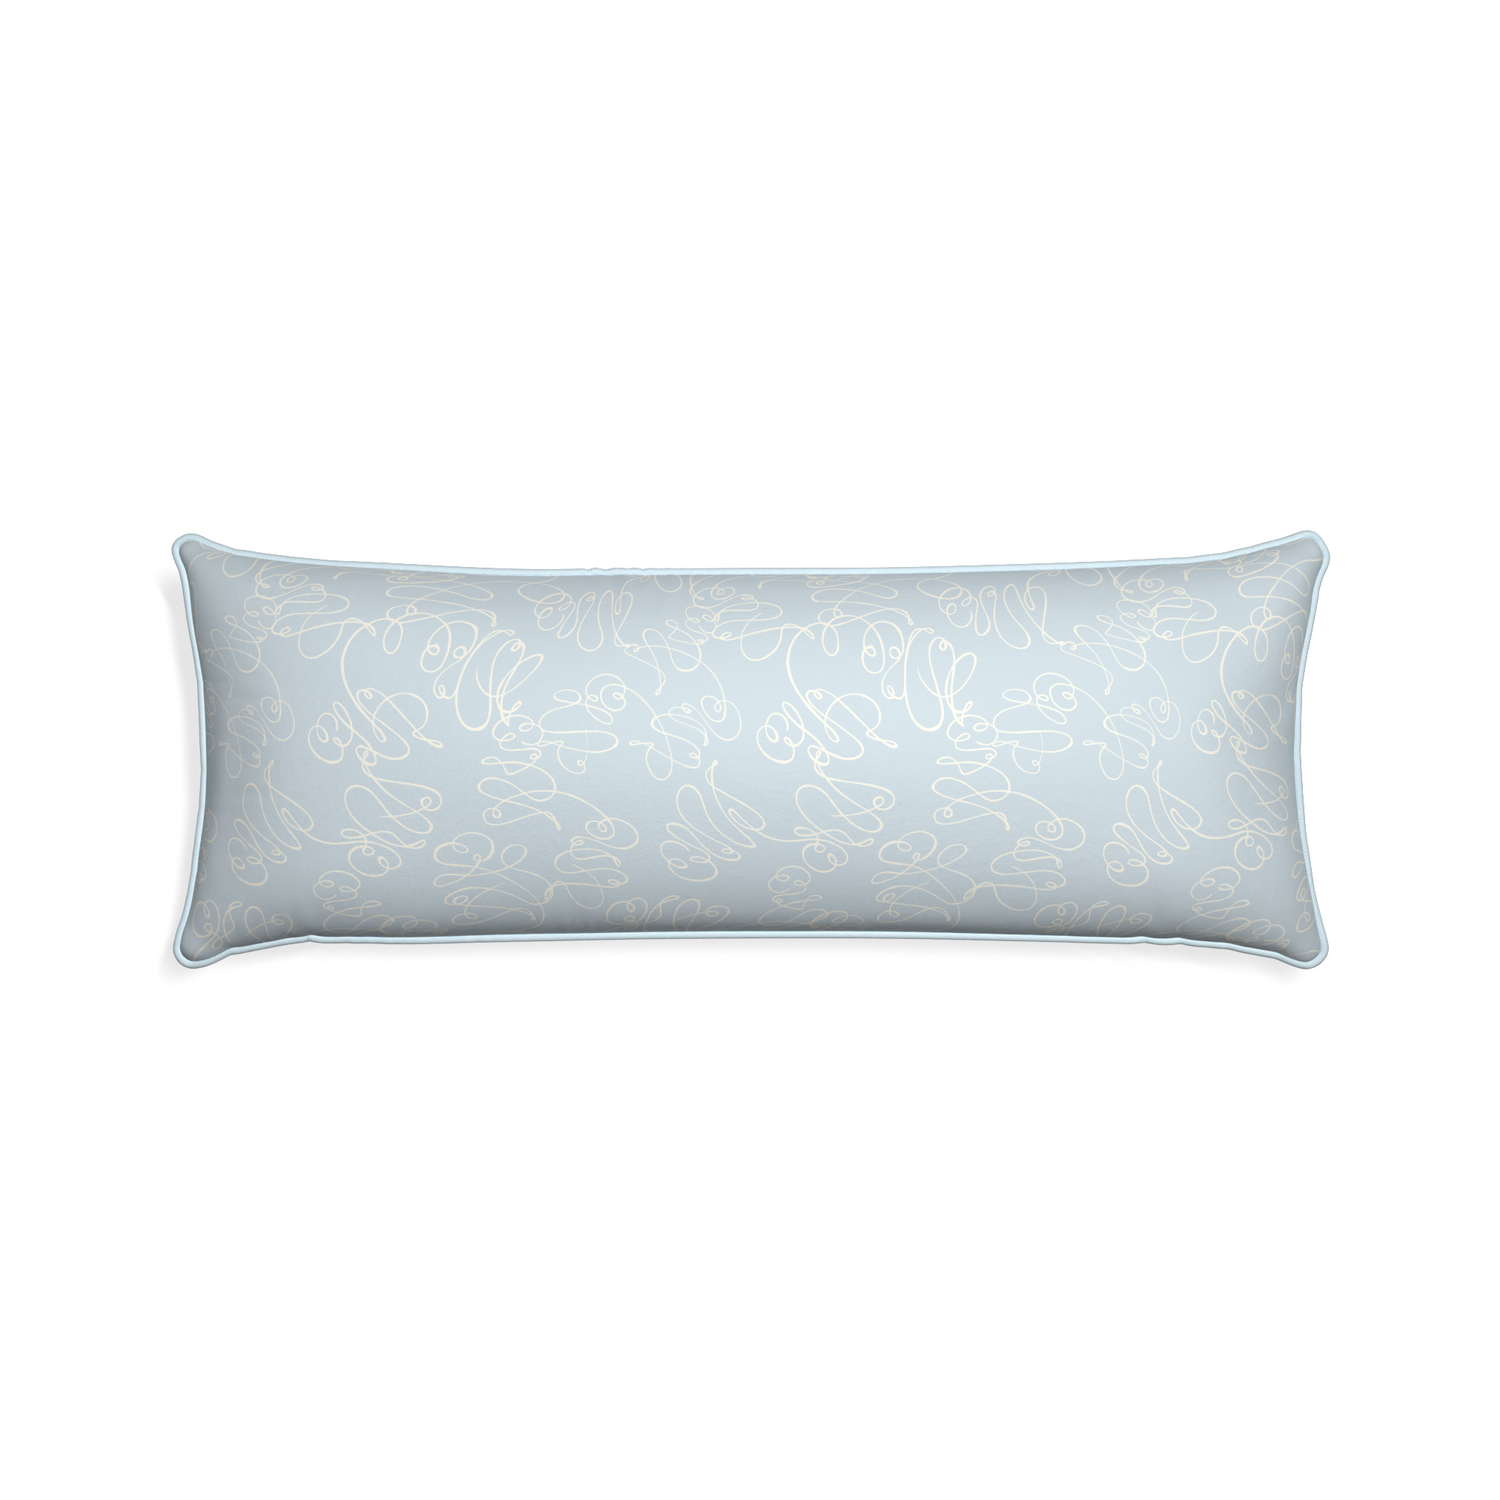 Xl-lumbar mirabella custom powder blue abstractpillow with powder piping on white background